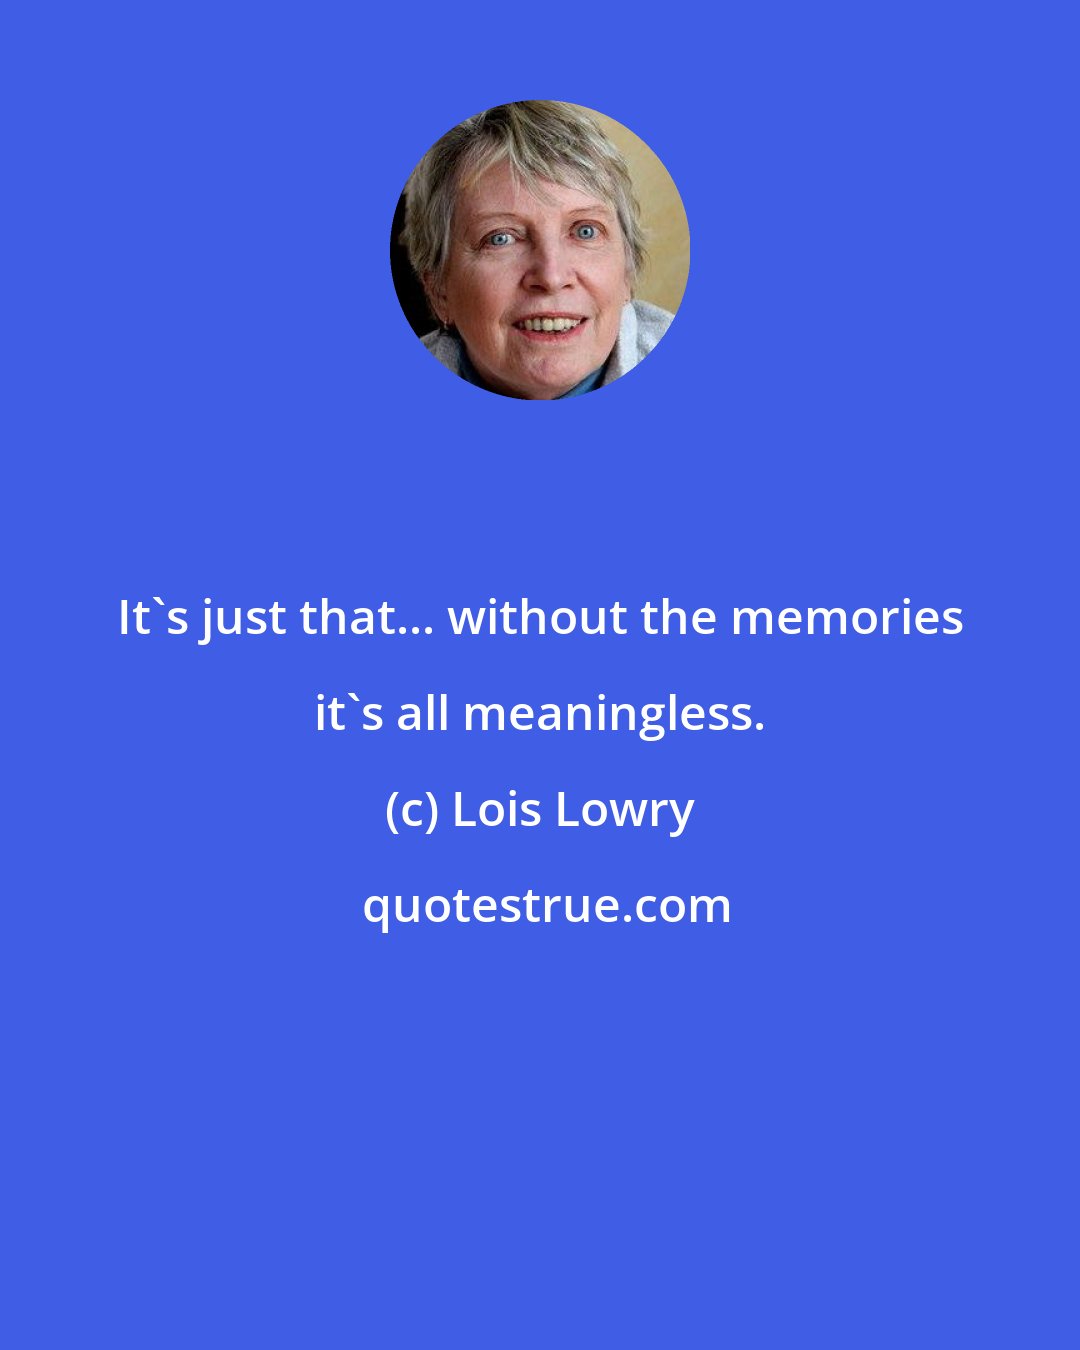 Lois Lowry: It's just that... without the memories it's all meaningless.